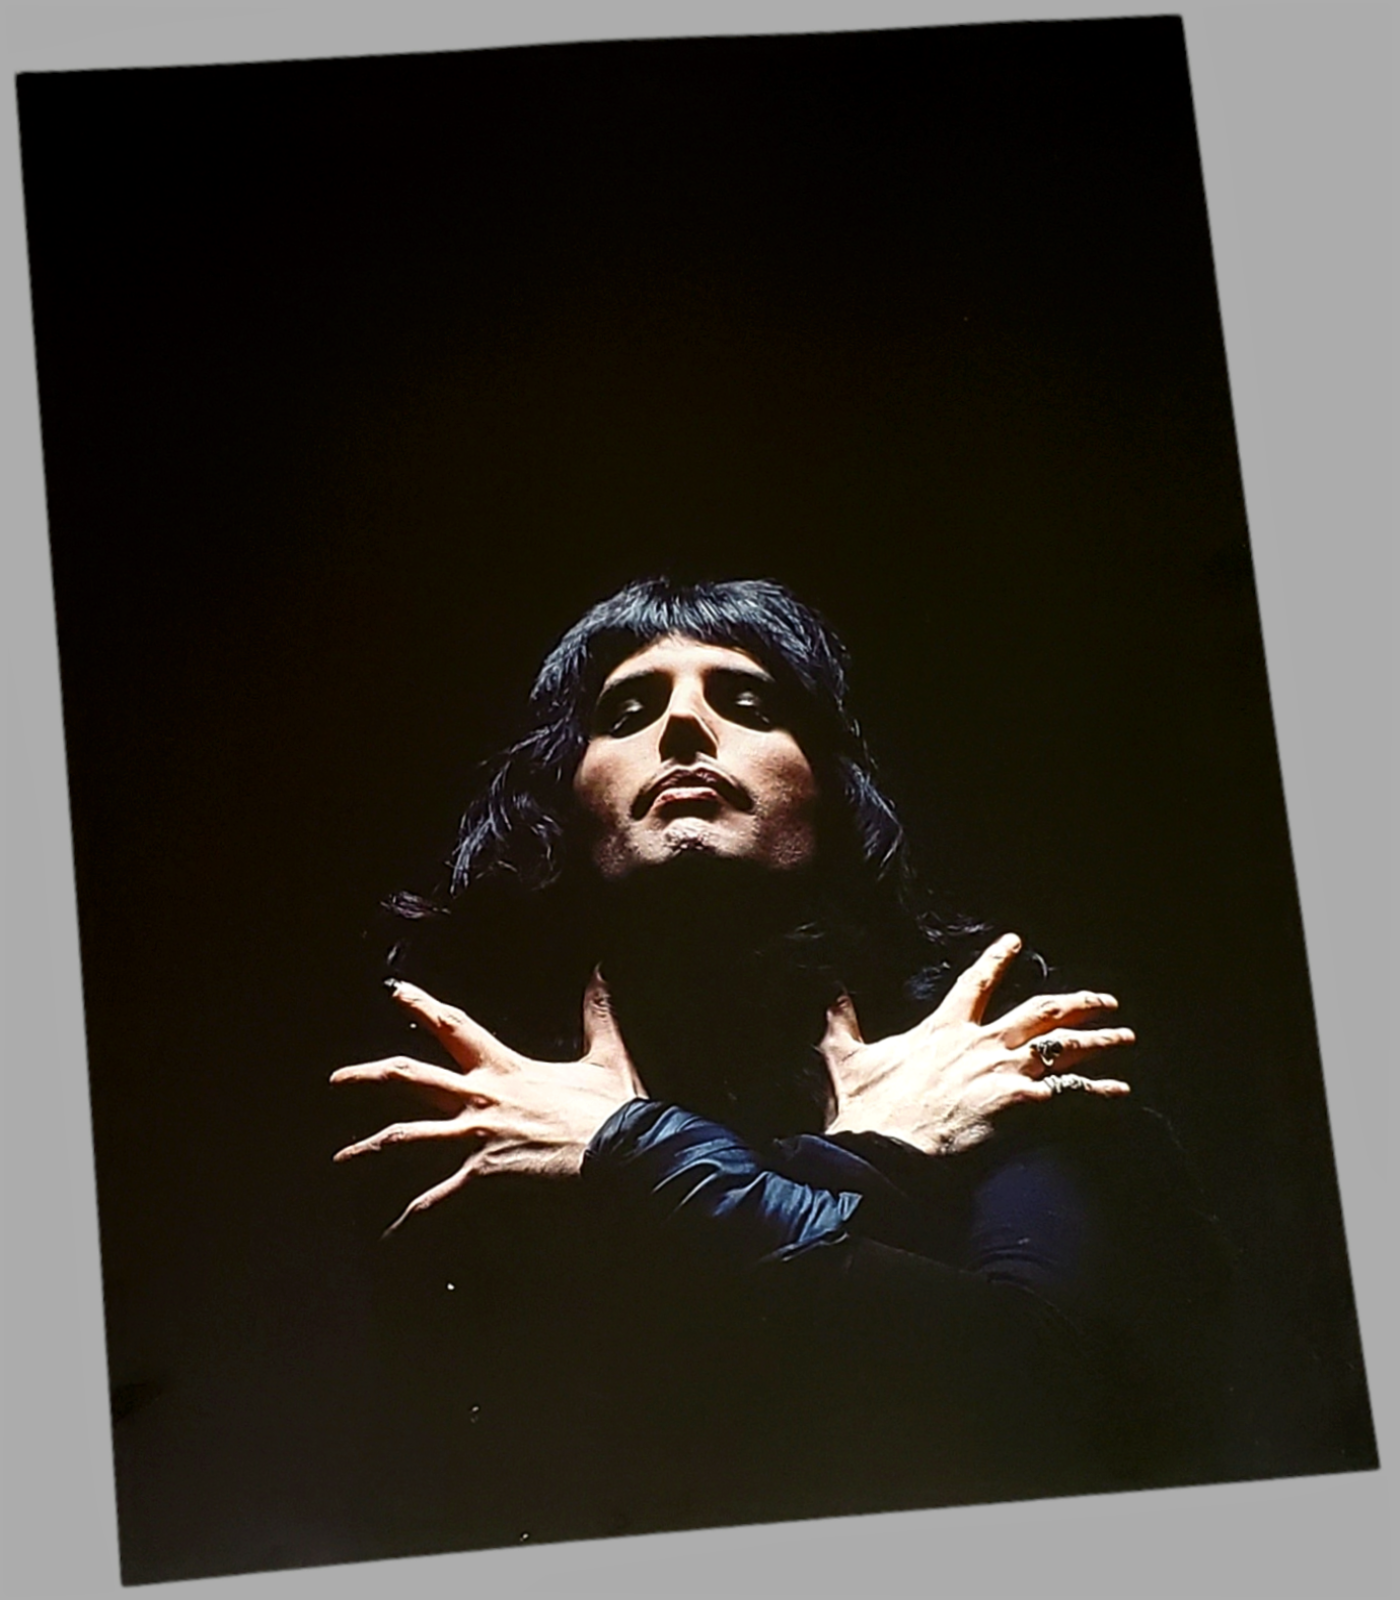 Freddie Mercury channeling Marlene Dietrich authentic photograph  featured in Freddie Mercury: The Great Pretender: A Life in Pictures 2019 hardcover book available in area51gallery